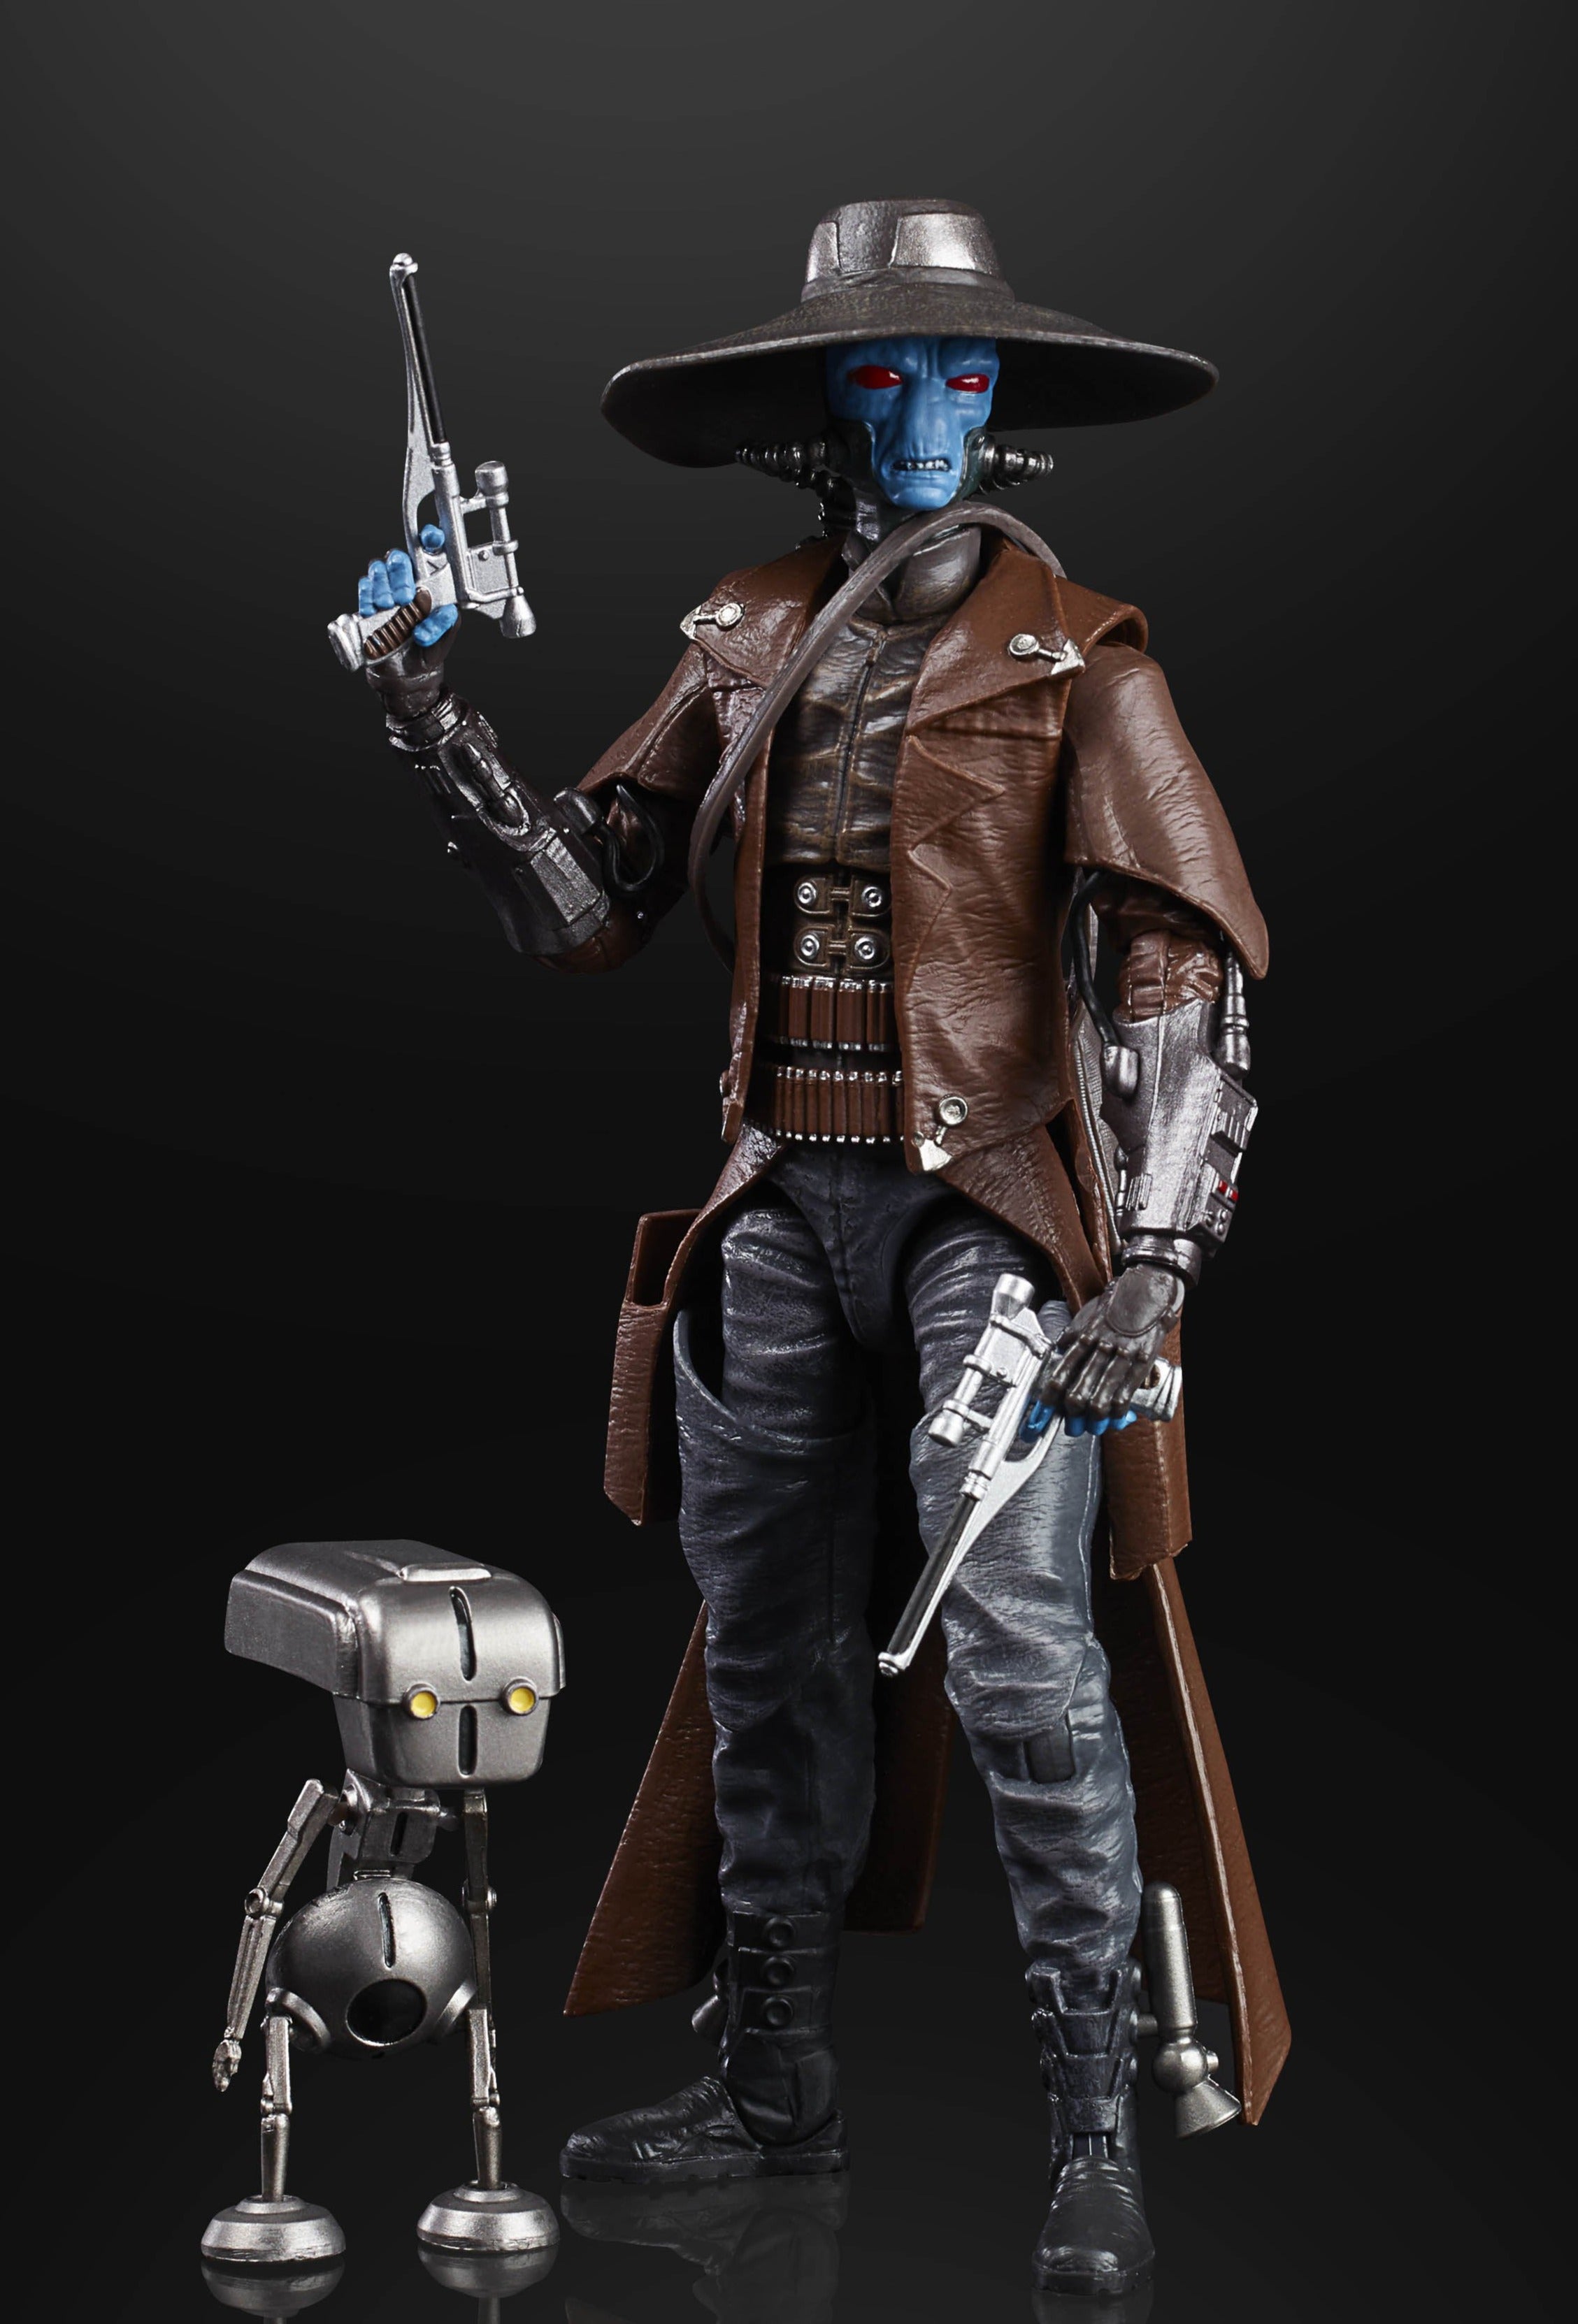 Hasbro Star Wars Black Series The Clone Wars Cad Bane and Todo 360 Star Wars Celebration 2020 Exclusive 6 Inch Action Figure